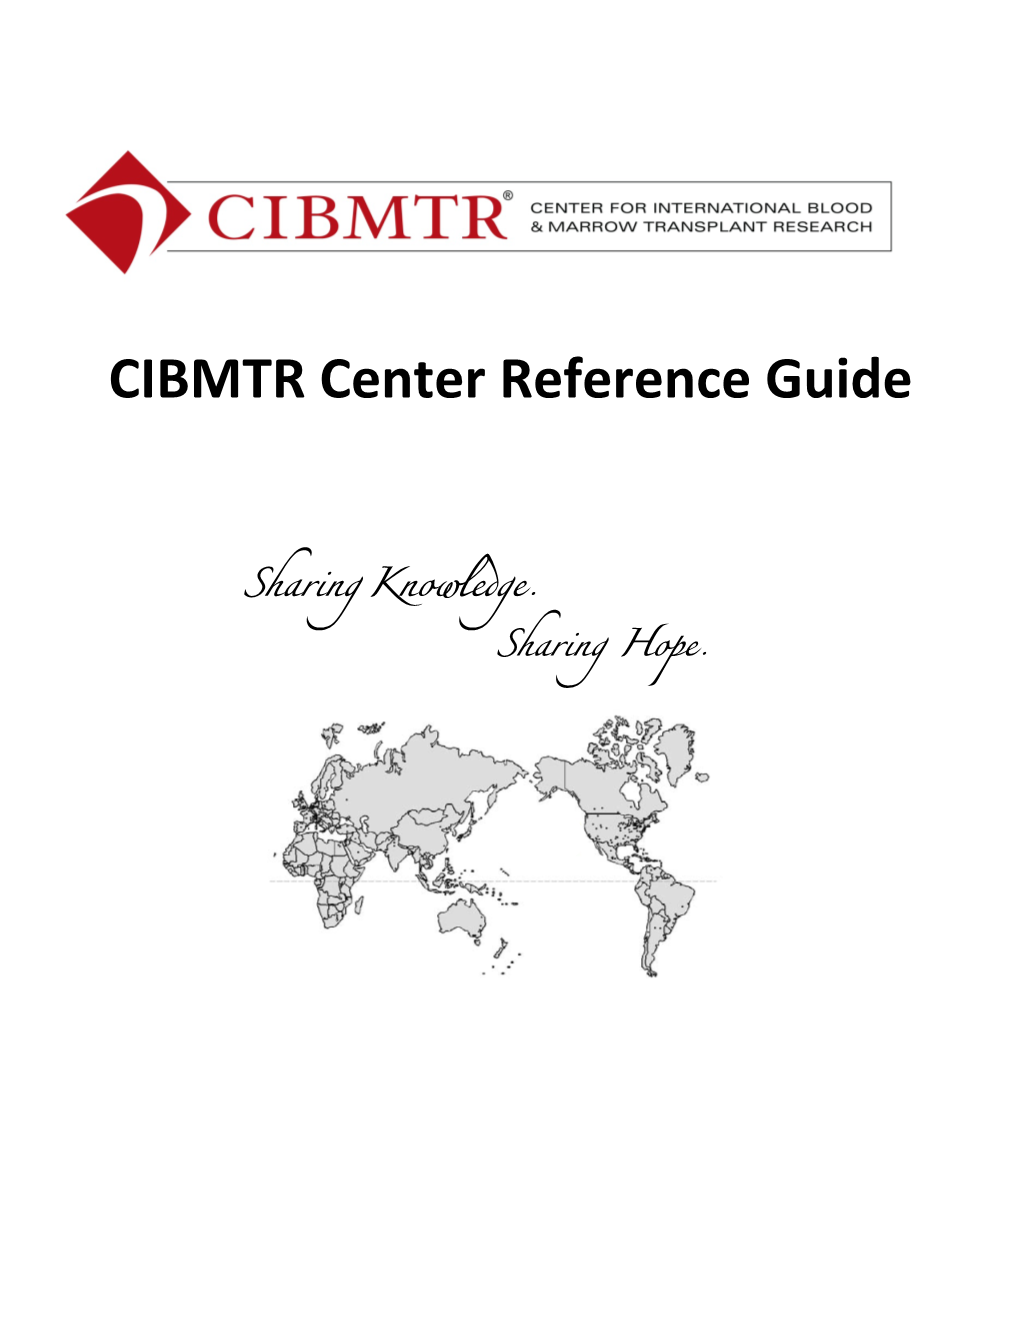 CIBMTR Center Reference Guide